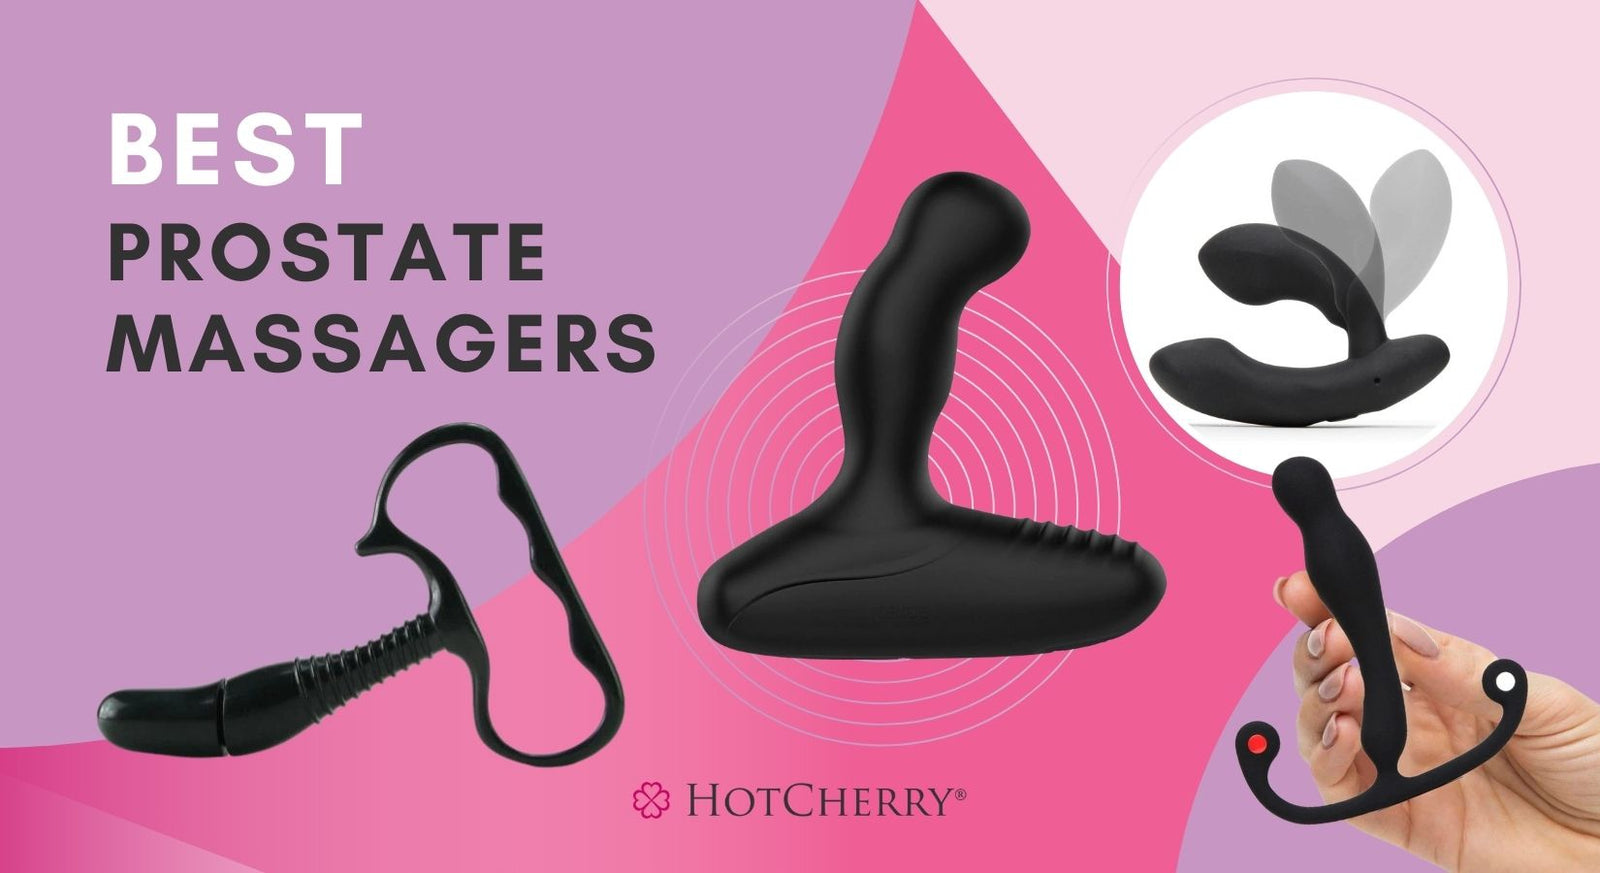 15 Best Prostate Massagers for Targeted P-Spot Stimulation